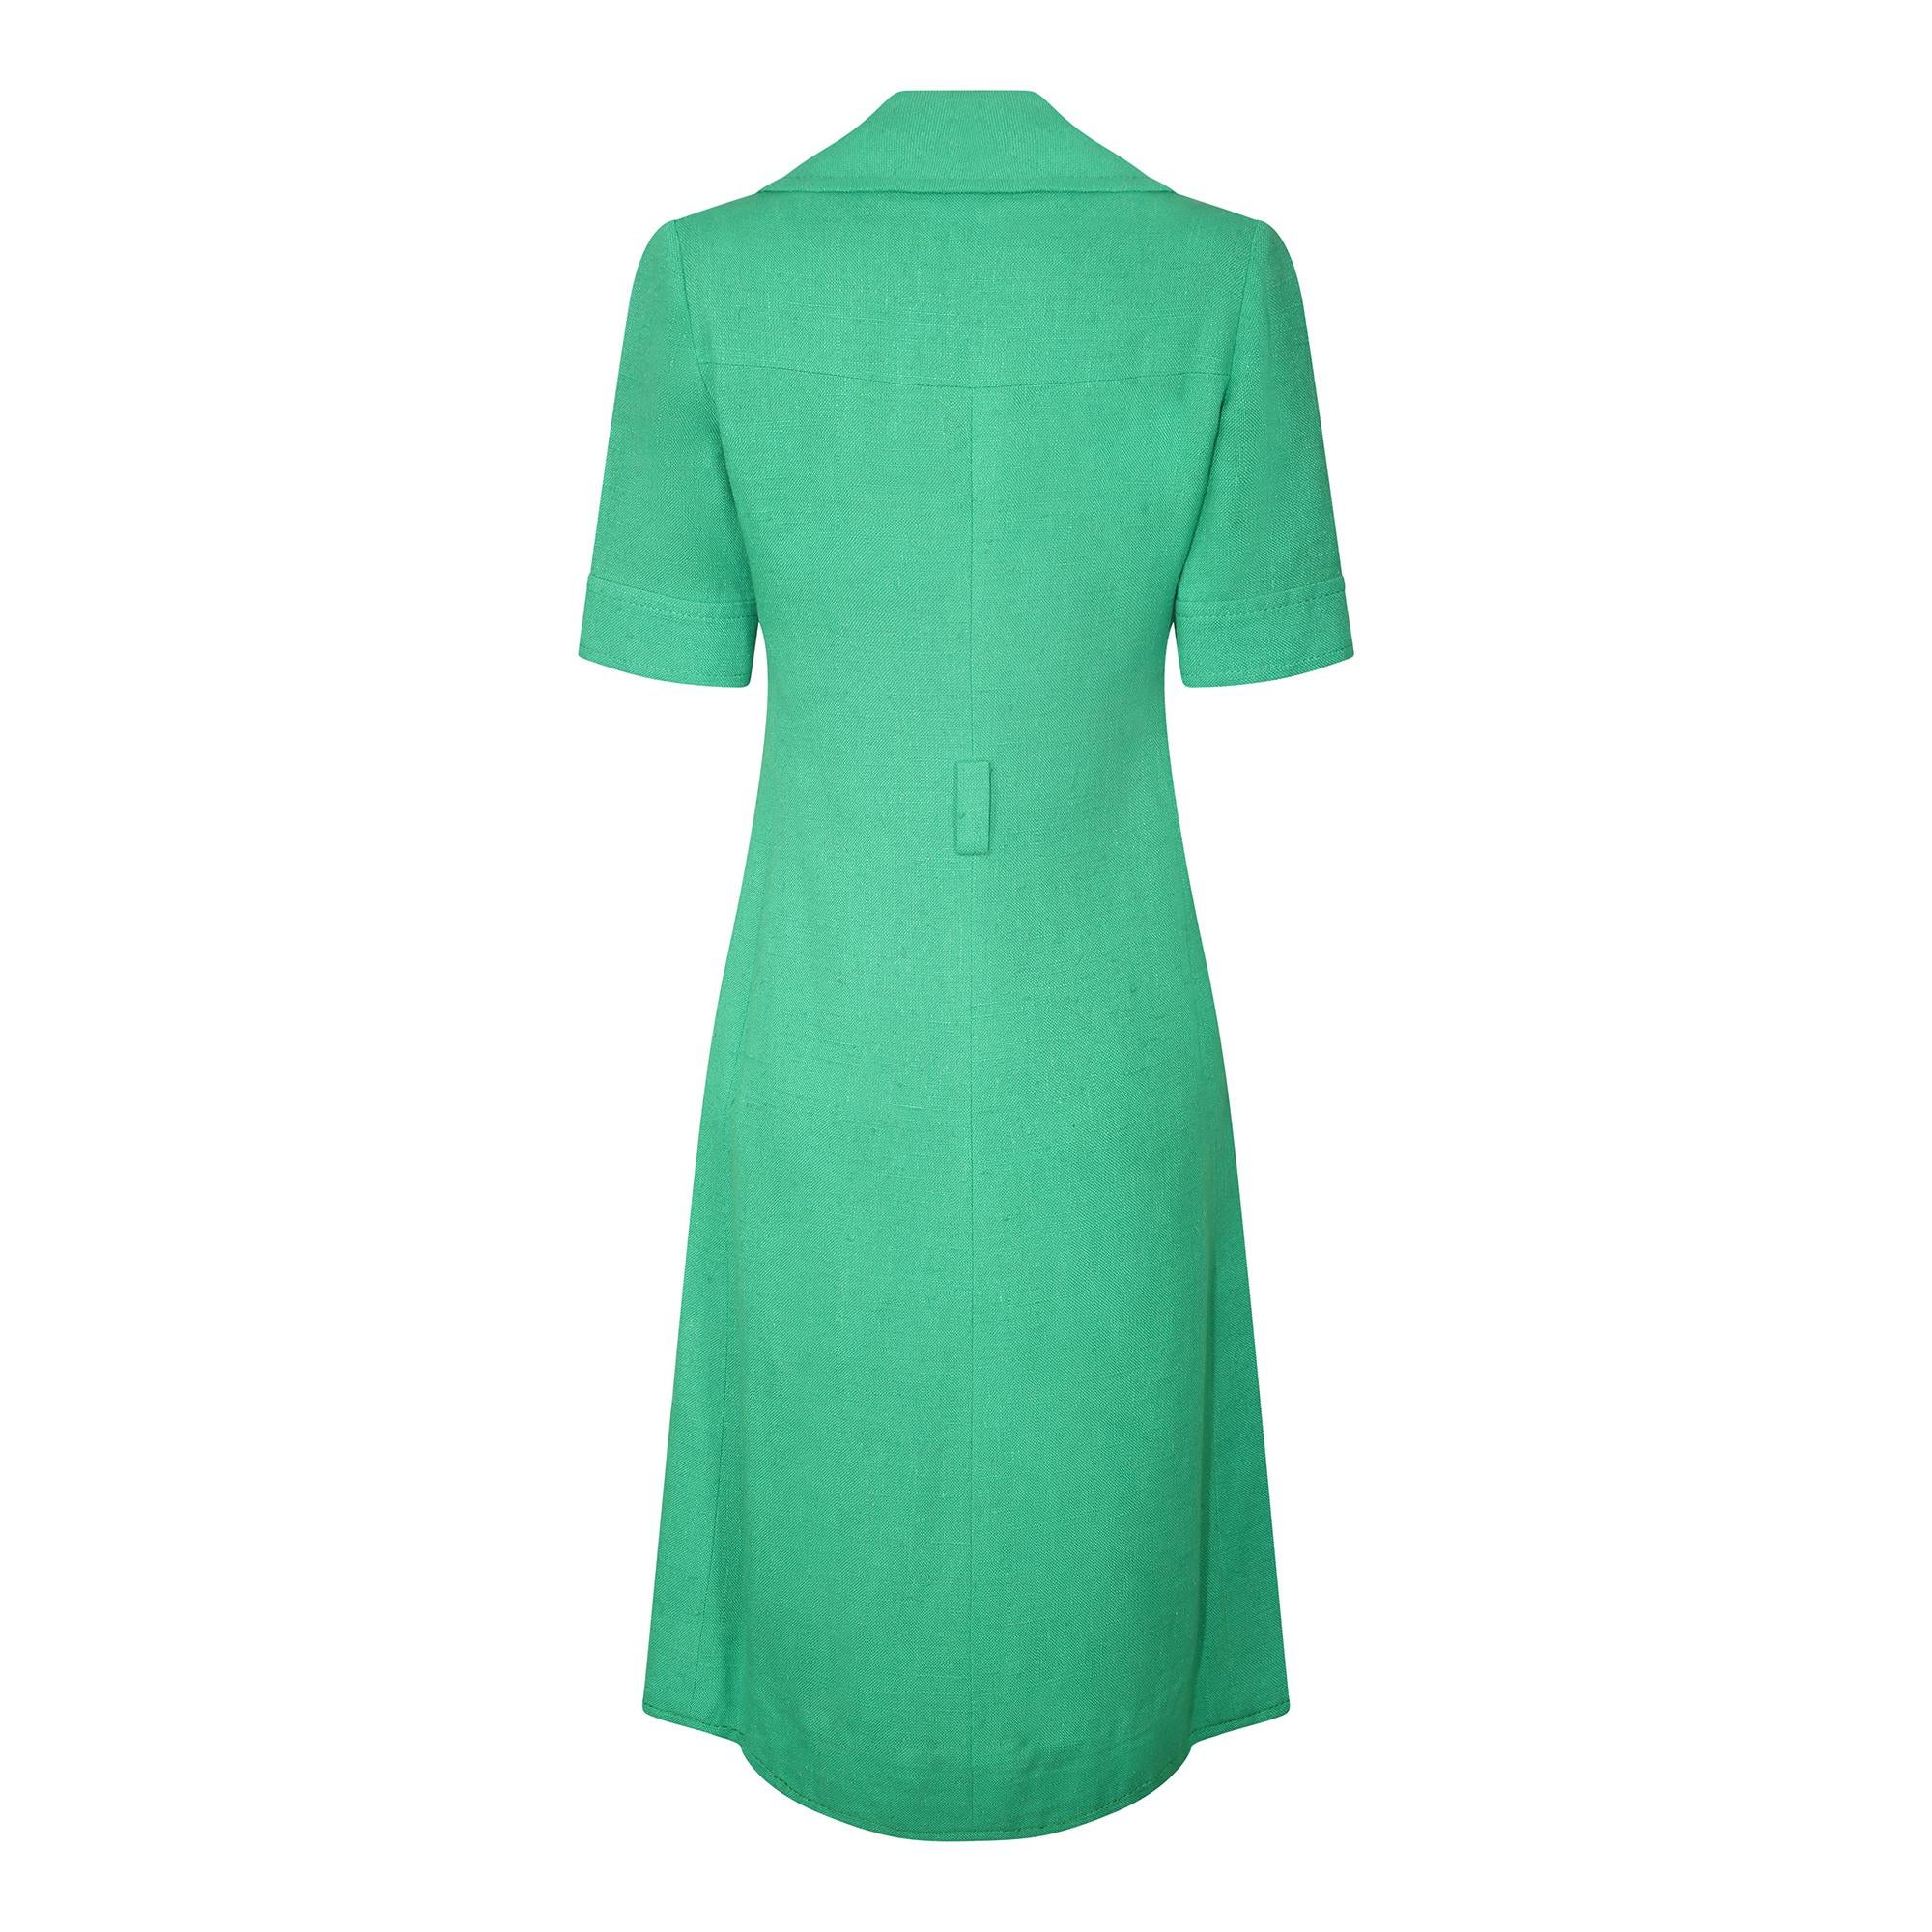 This is a great example of early unisex fashion from the revered French designer Ted Lapidus.  He popularised sports utility wear and the safari suit look along with Yves Saint Laurent in the 60s and 70s.  This dress is made from a richly woven